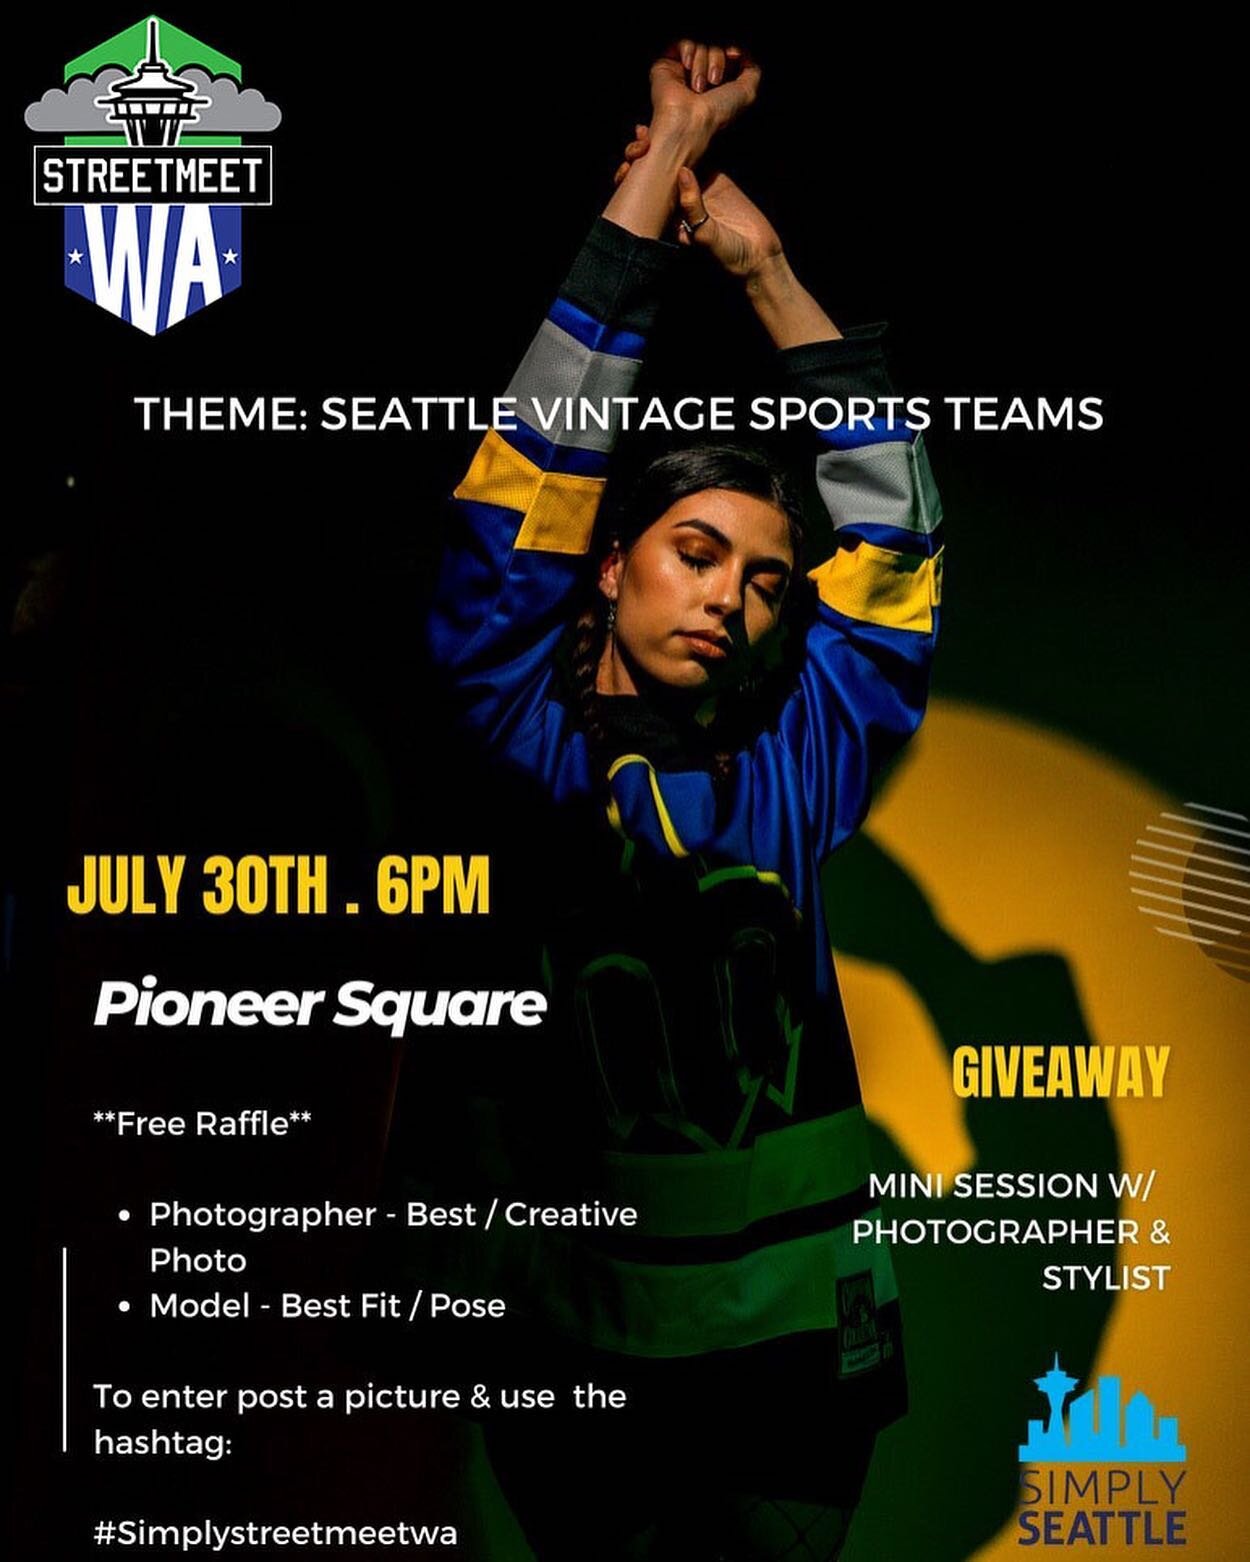 This Saturday it&rsquo;s on and we&rsquo;re pairing up with @simplyseattle to do a giveaway! For to do the following:

- Follow @simplyseattle &amp; our page if not already!
- Show up in your favorite vintage jersey! 
- Use hash tag #SimplyStreetMeet